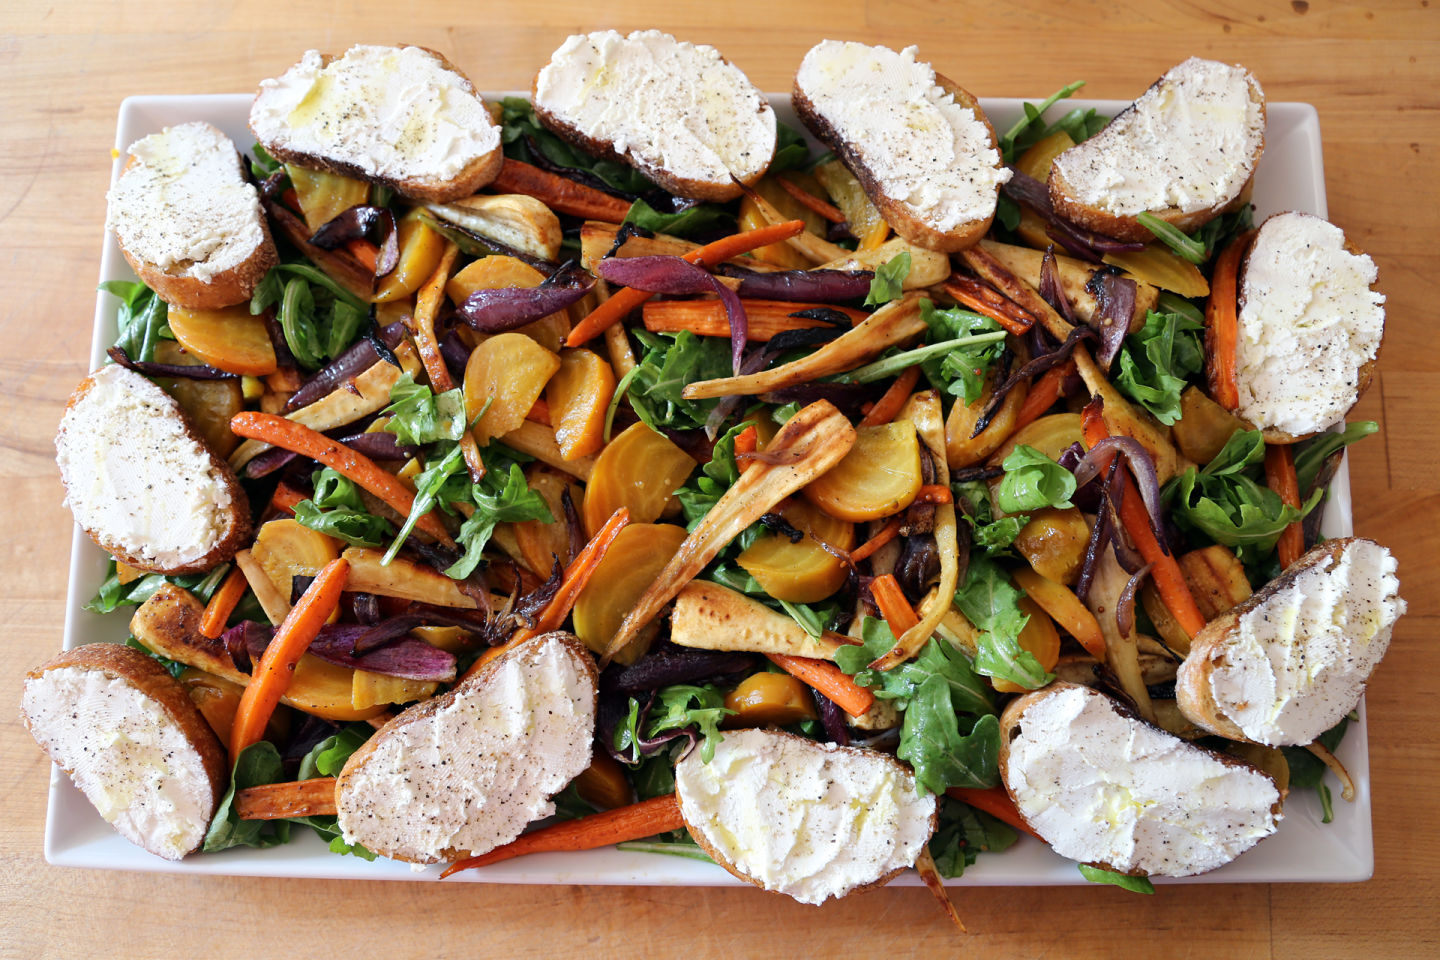 Autumn Root Vegetable Salad with Goat Cheese Crostini Wendy Goodfriend